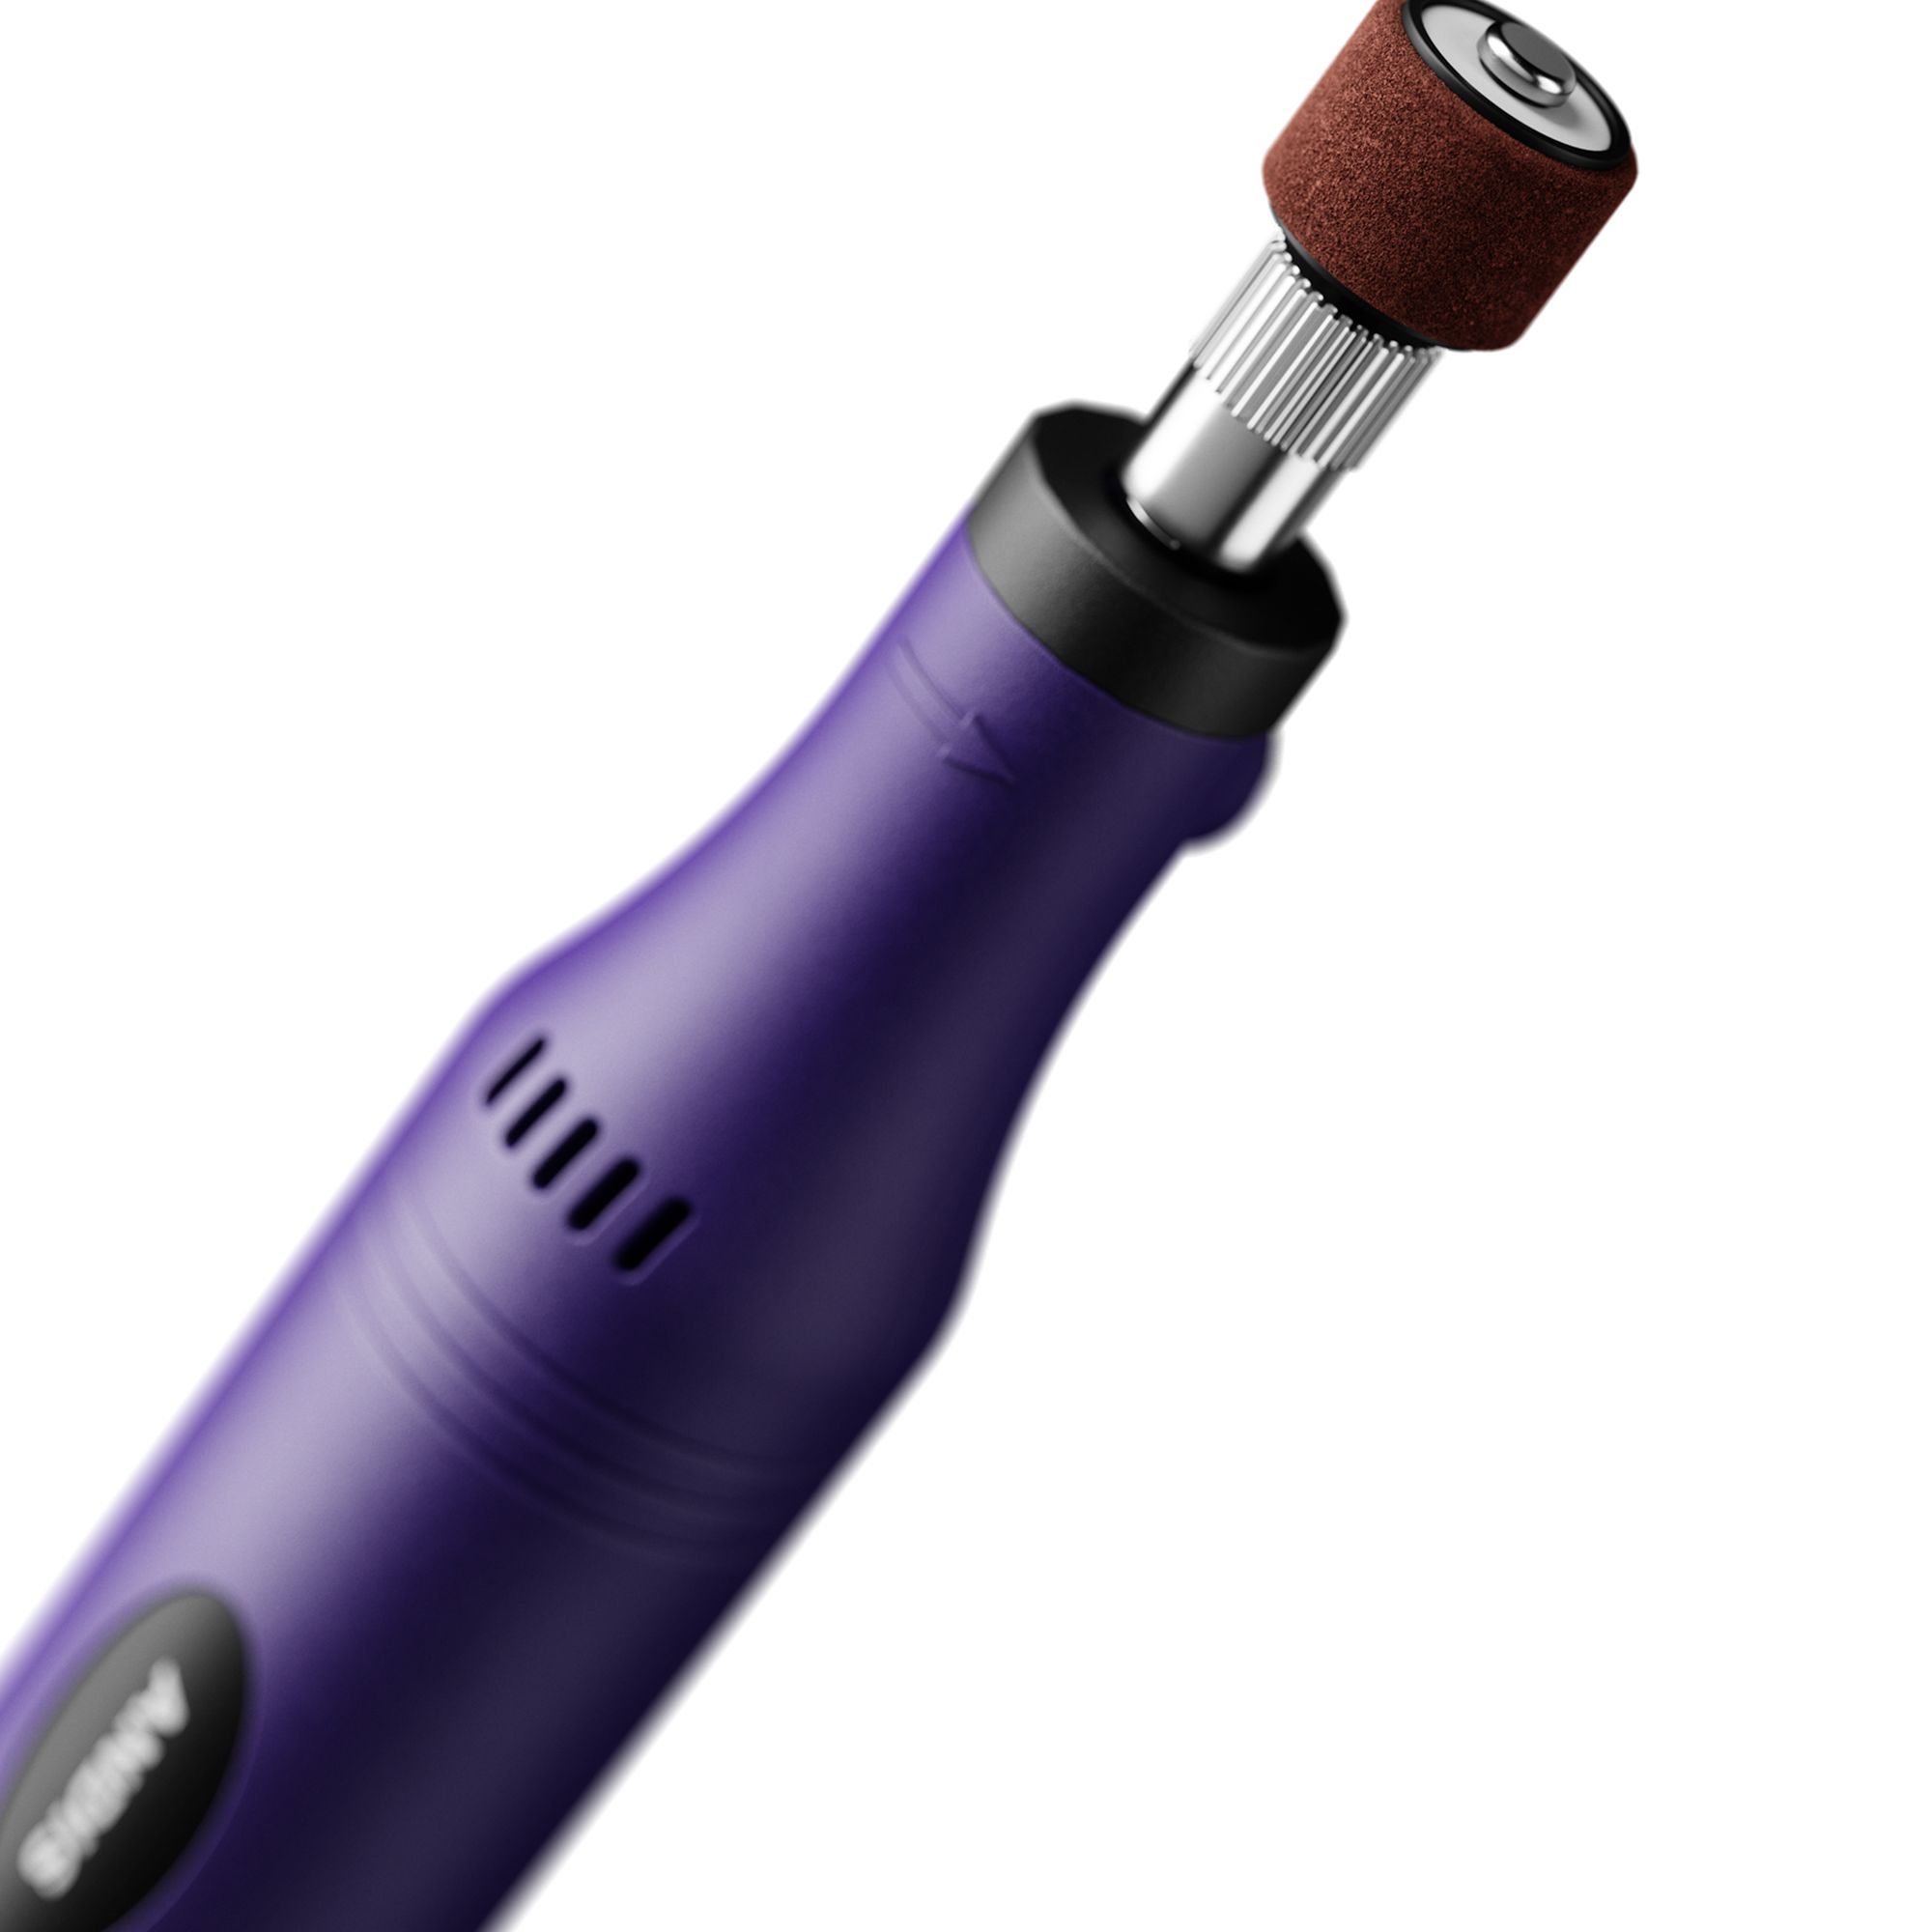 andis nail trimmer